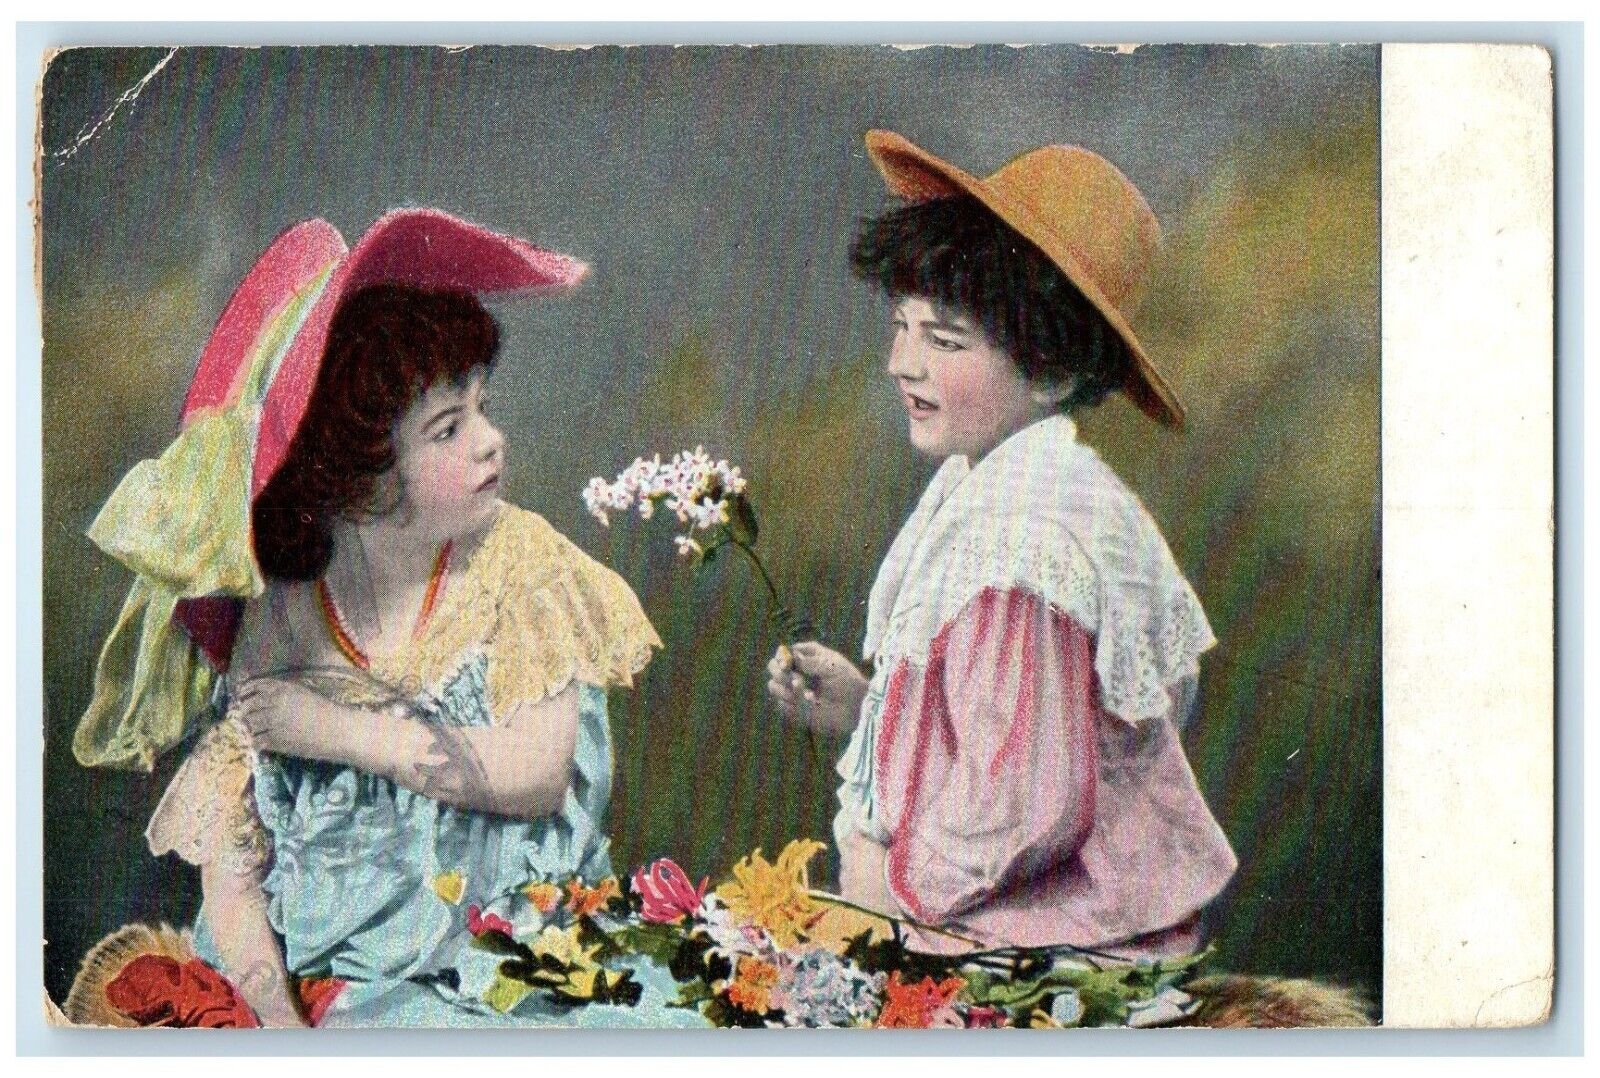 1908 Little Sweetheart Giving Flowers Potsdam New York NY Antique Postcard